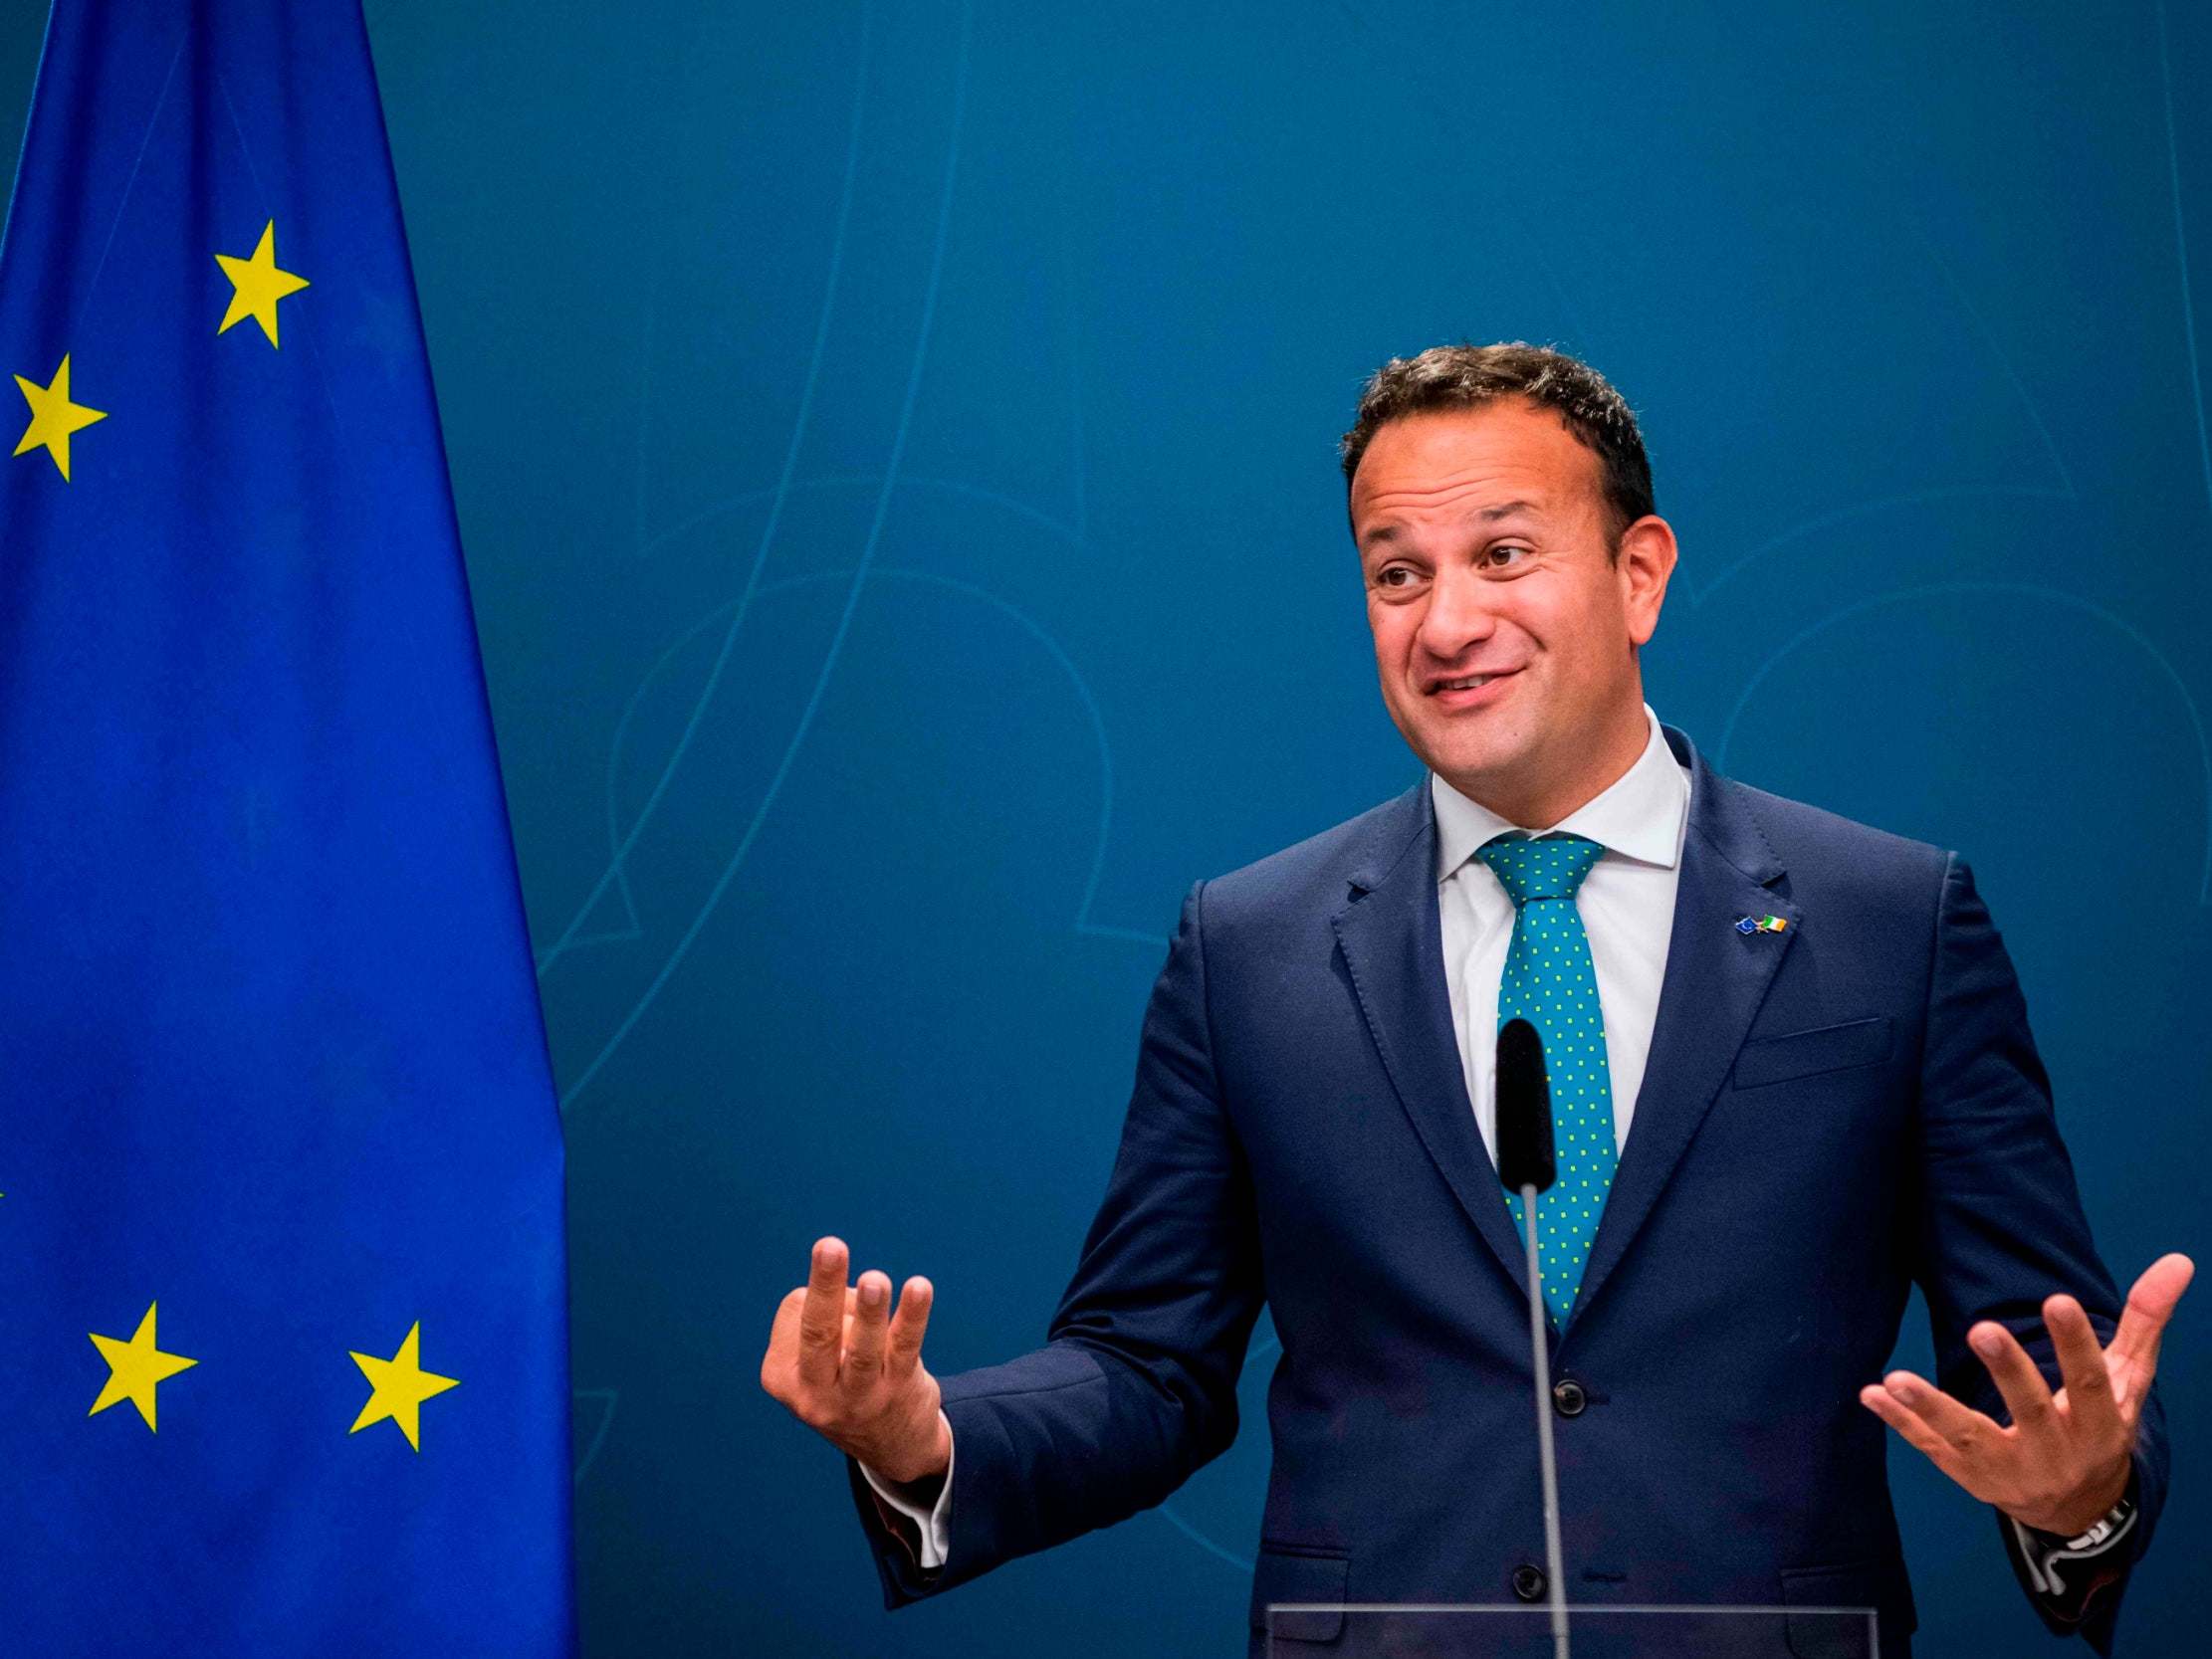 Brexit: EU will have the upper hand in post-exit trade talks with UK, says Ireland's Varadkar